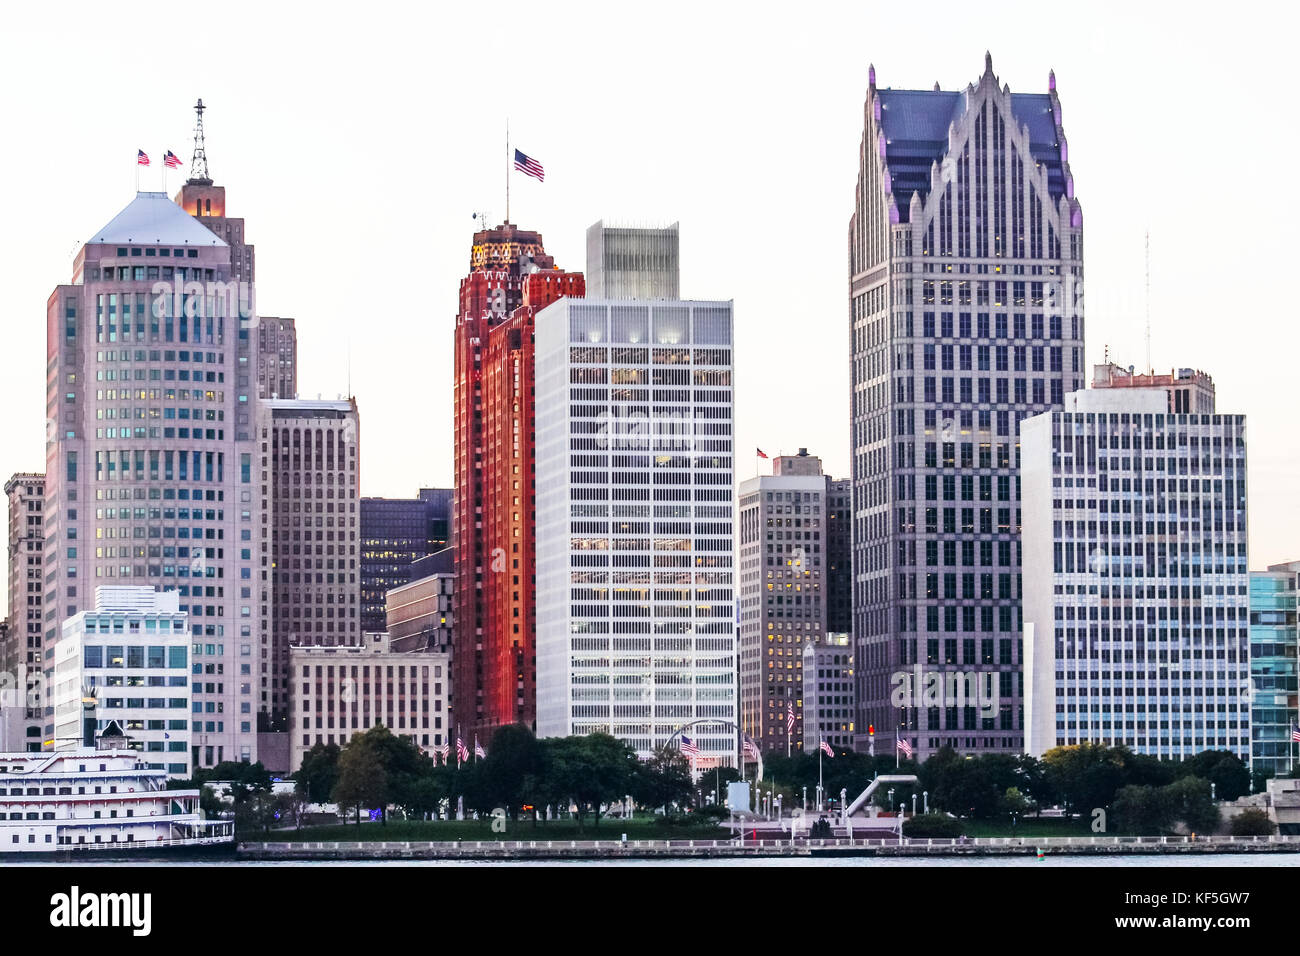 Detroit, MI, USA - 2nd October 2016: Iconic Buildings lining the Detroit River Waterfront as viewed from Windsor, Ontario, Canada at dusk. Stock Photo